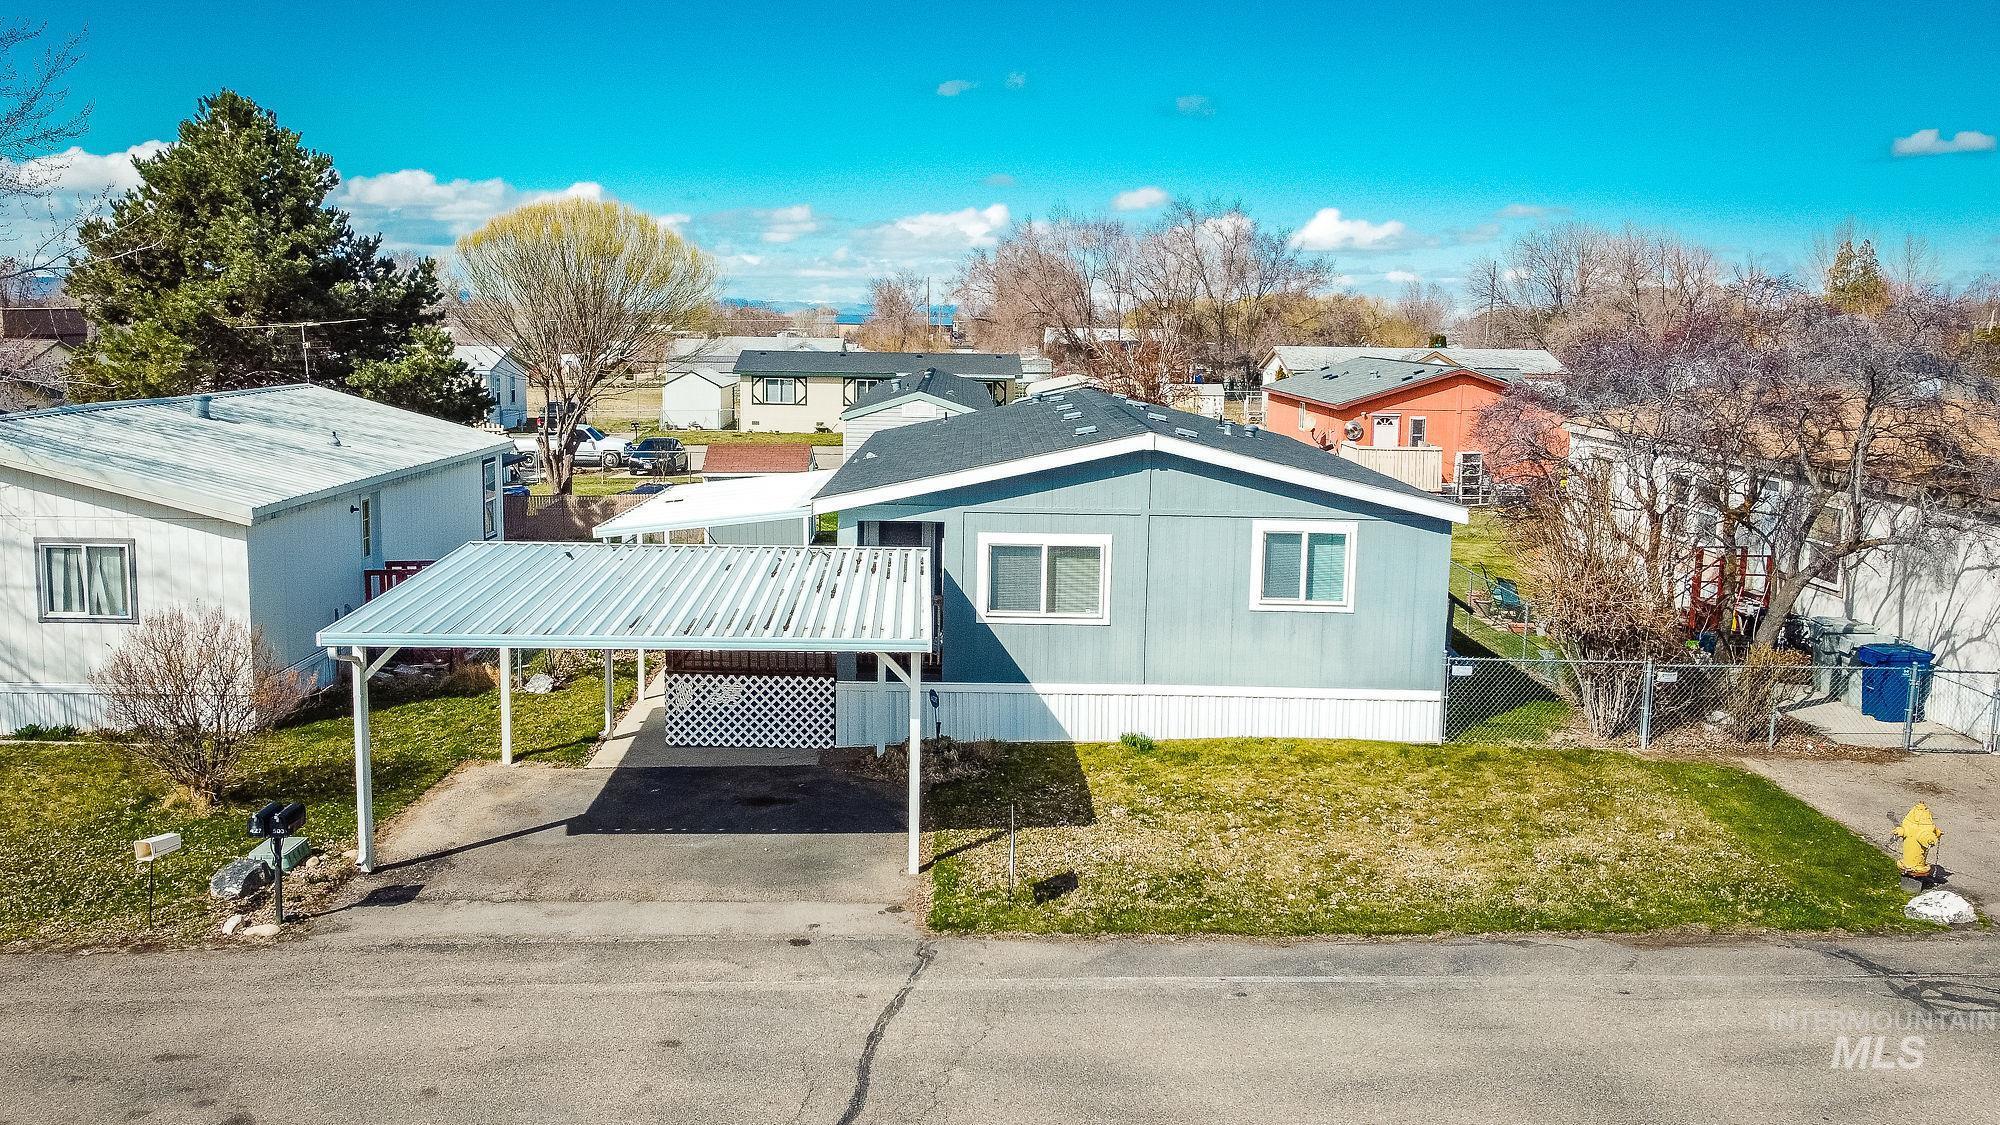 503 River Valley St, Nampa, Idaho 83687, 2 Bedrooms Bedrooms, ,2 BathroomsBathrooms,Residential,For Sale,503 River Valley St,98867650